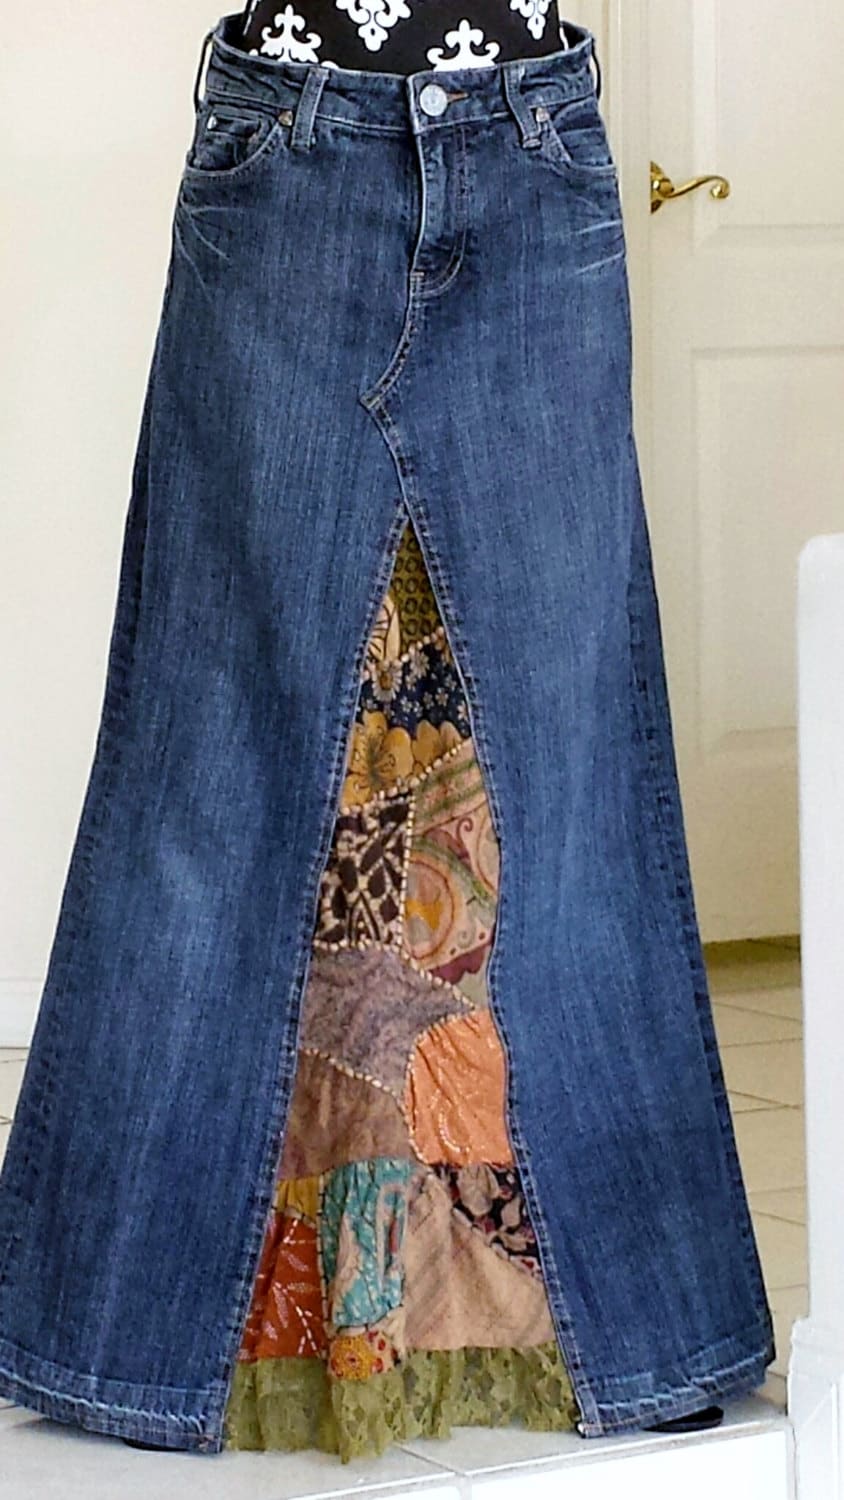 Long redone denim skirt with lace and vintage patchwork